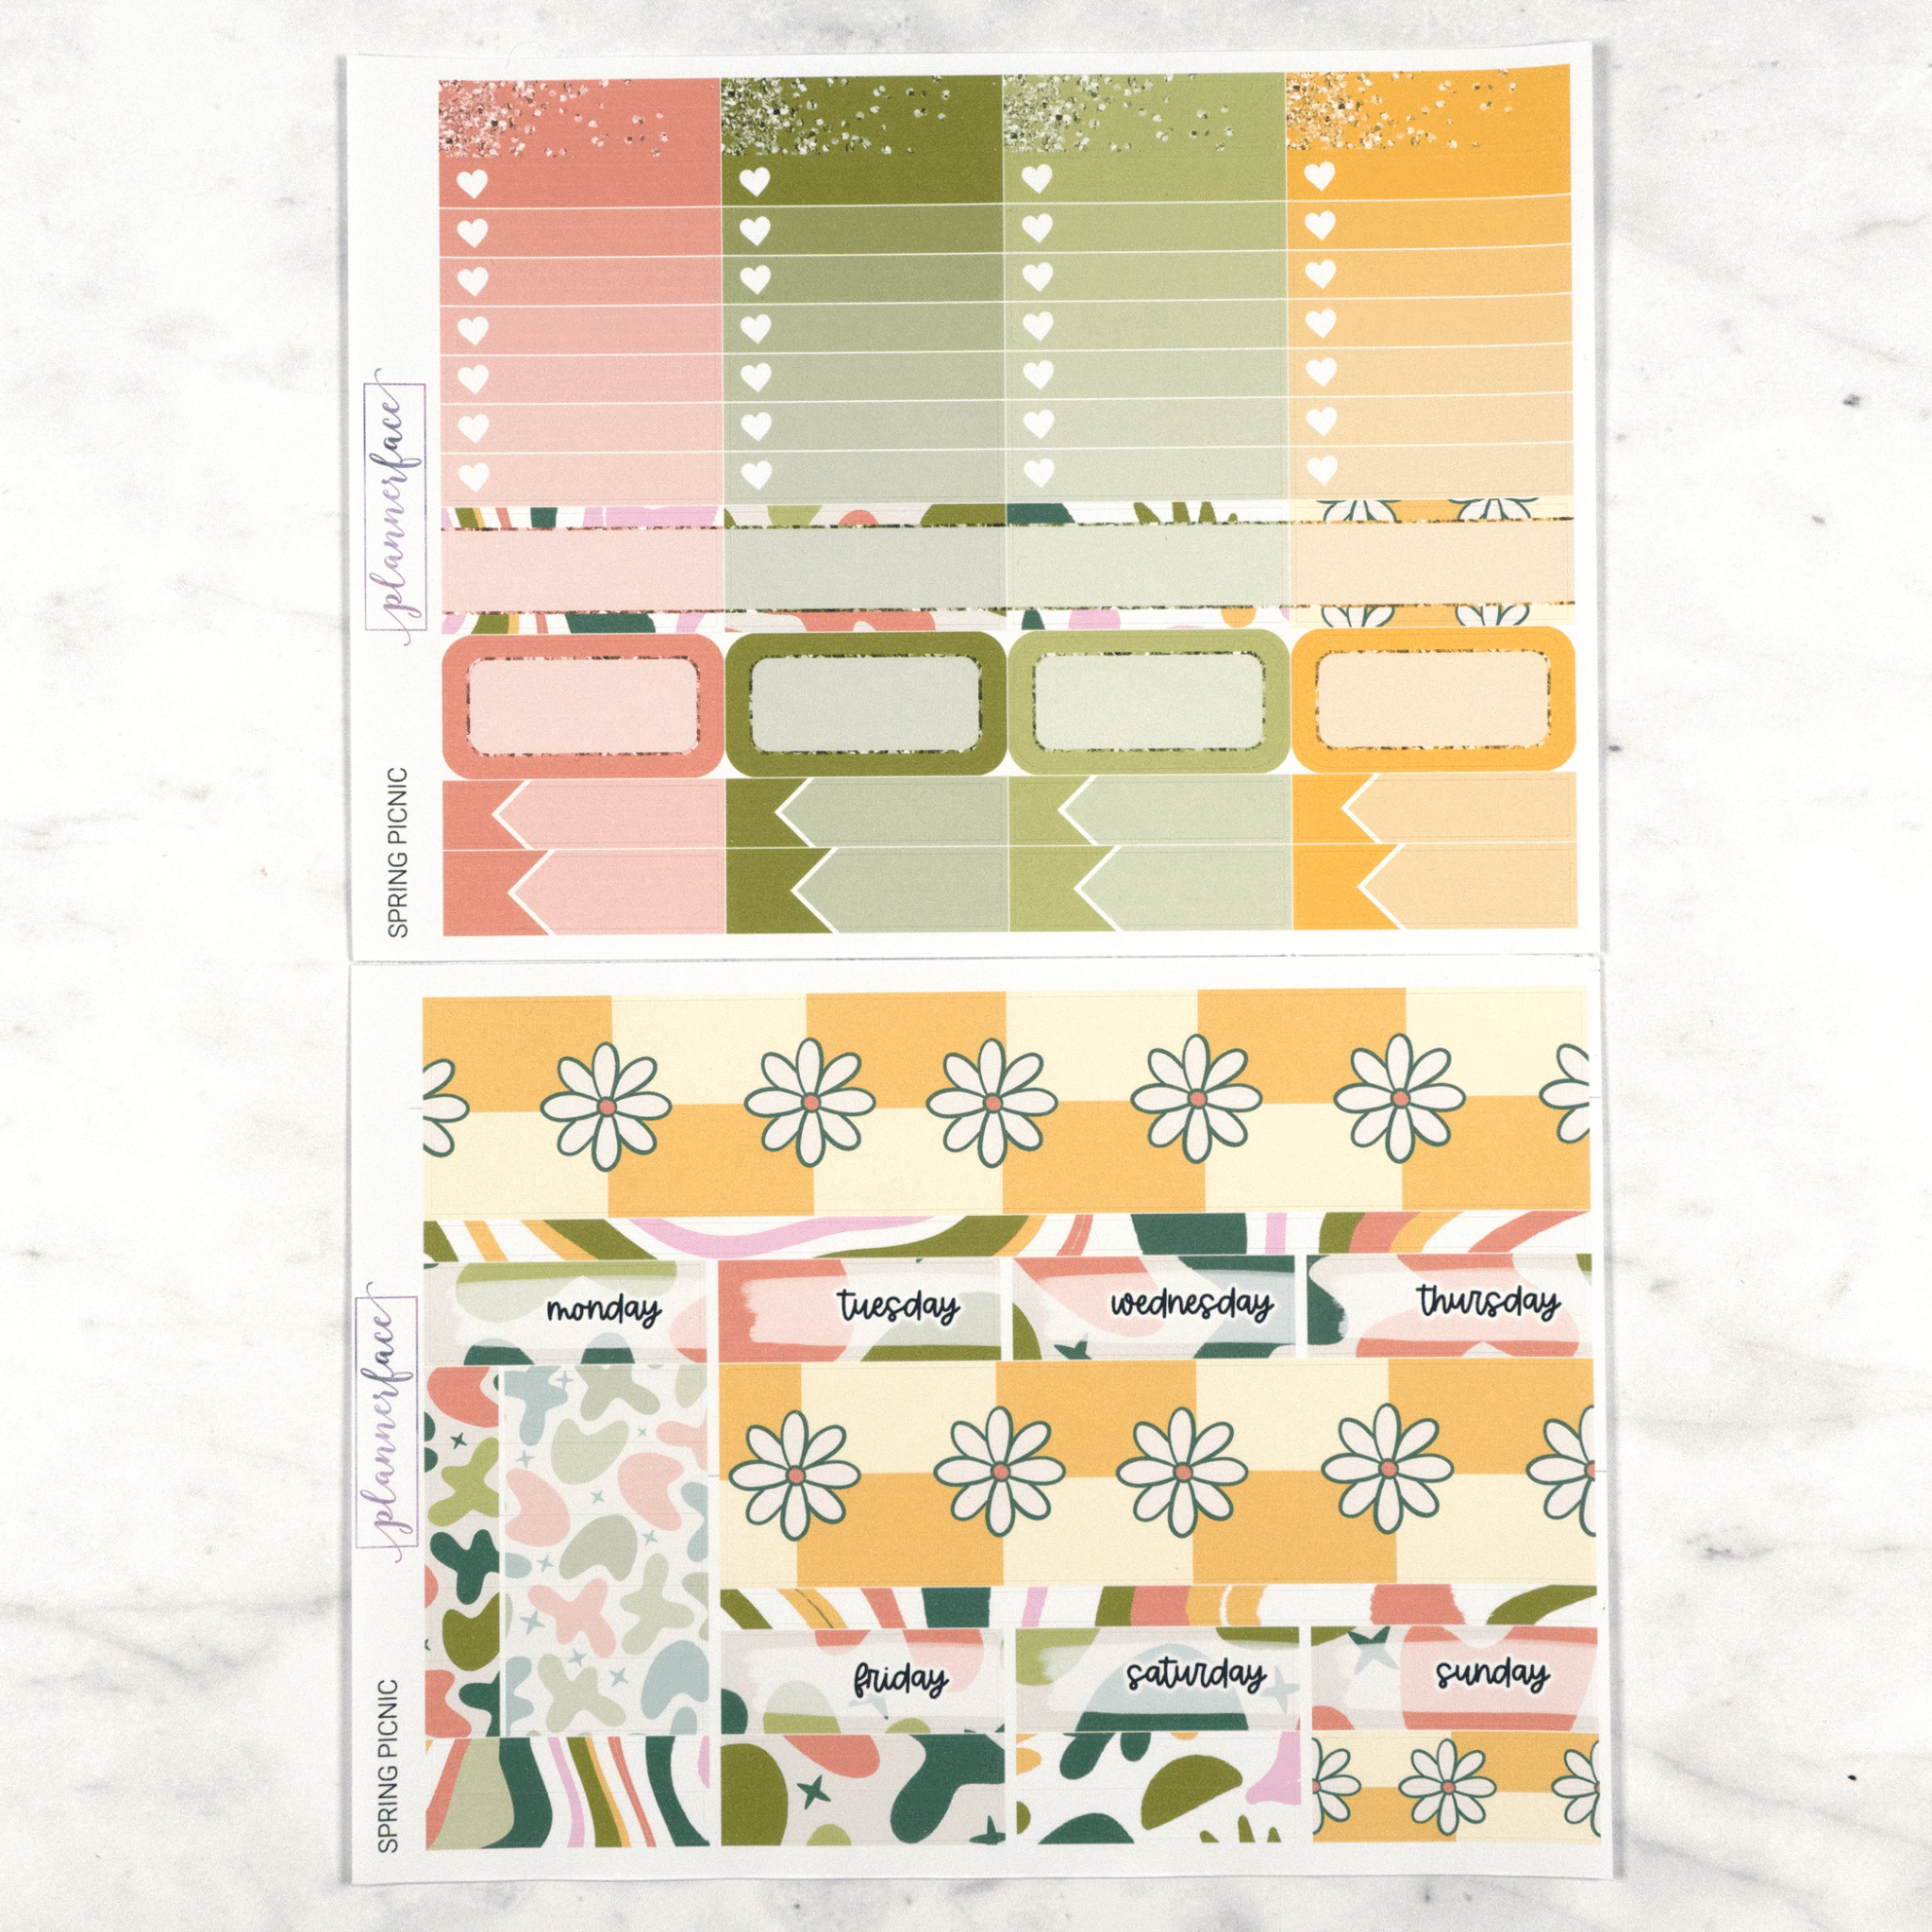 Spring Picnic Weekly Kit by Plannerface